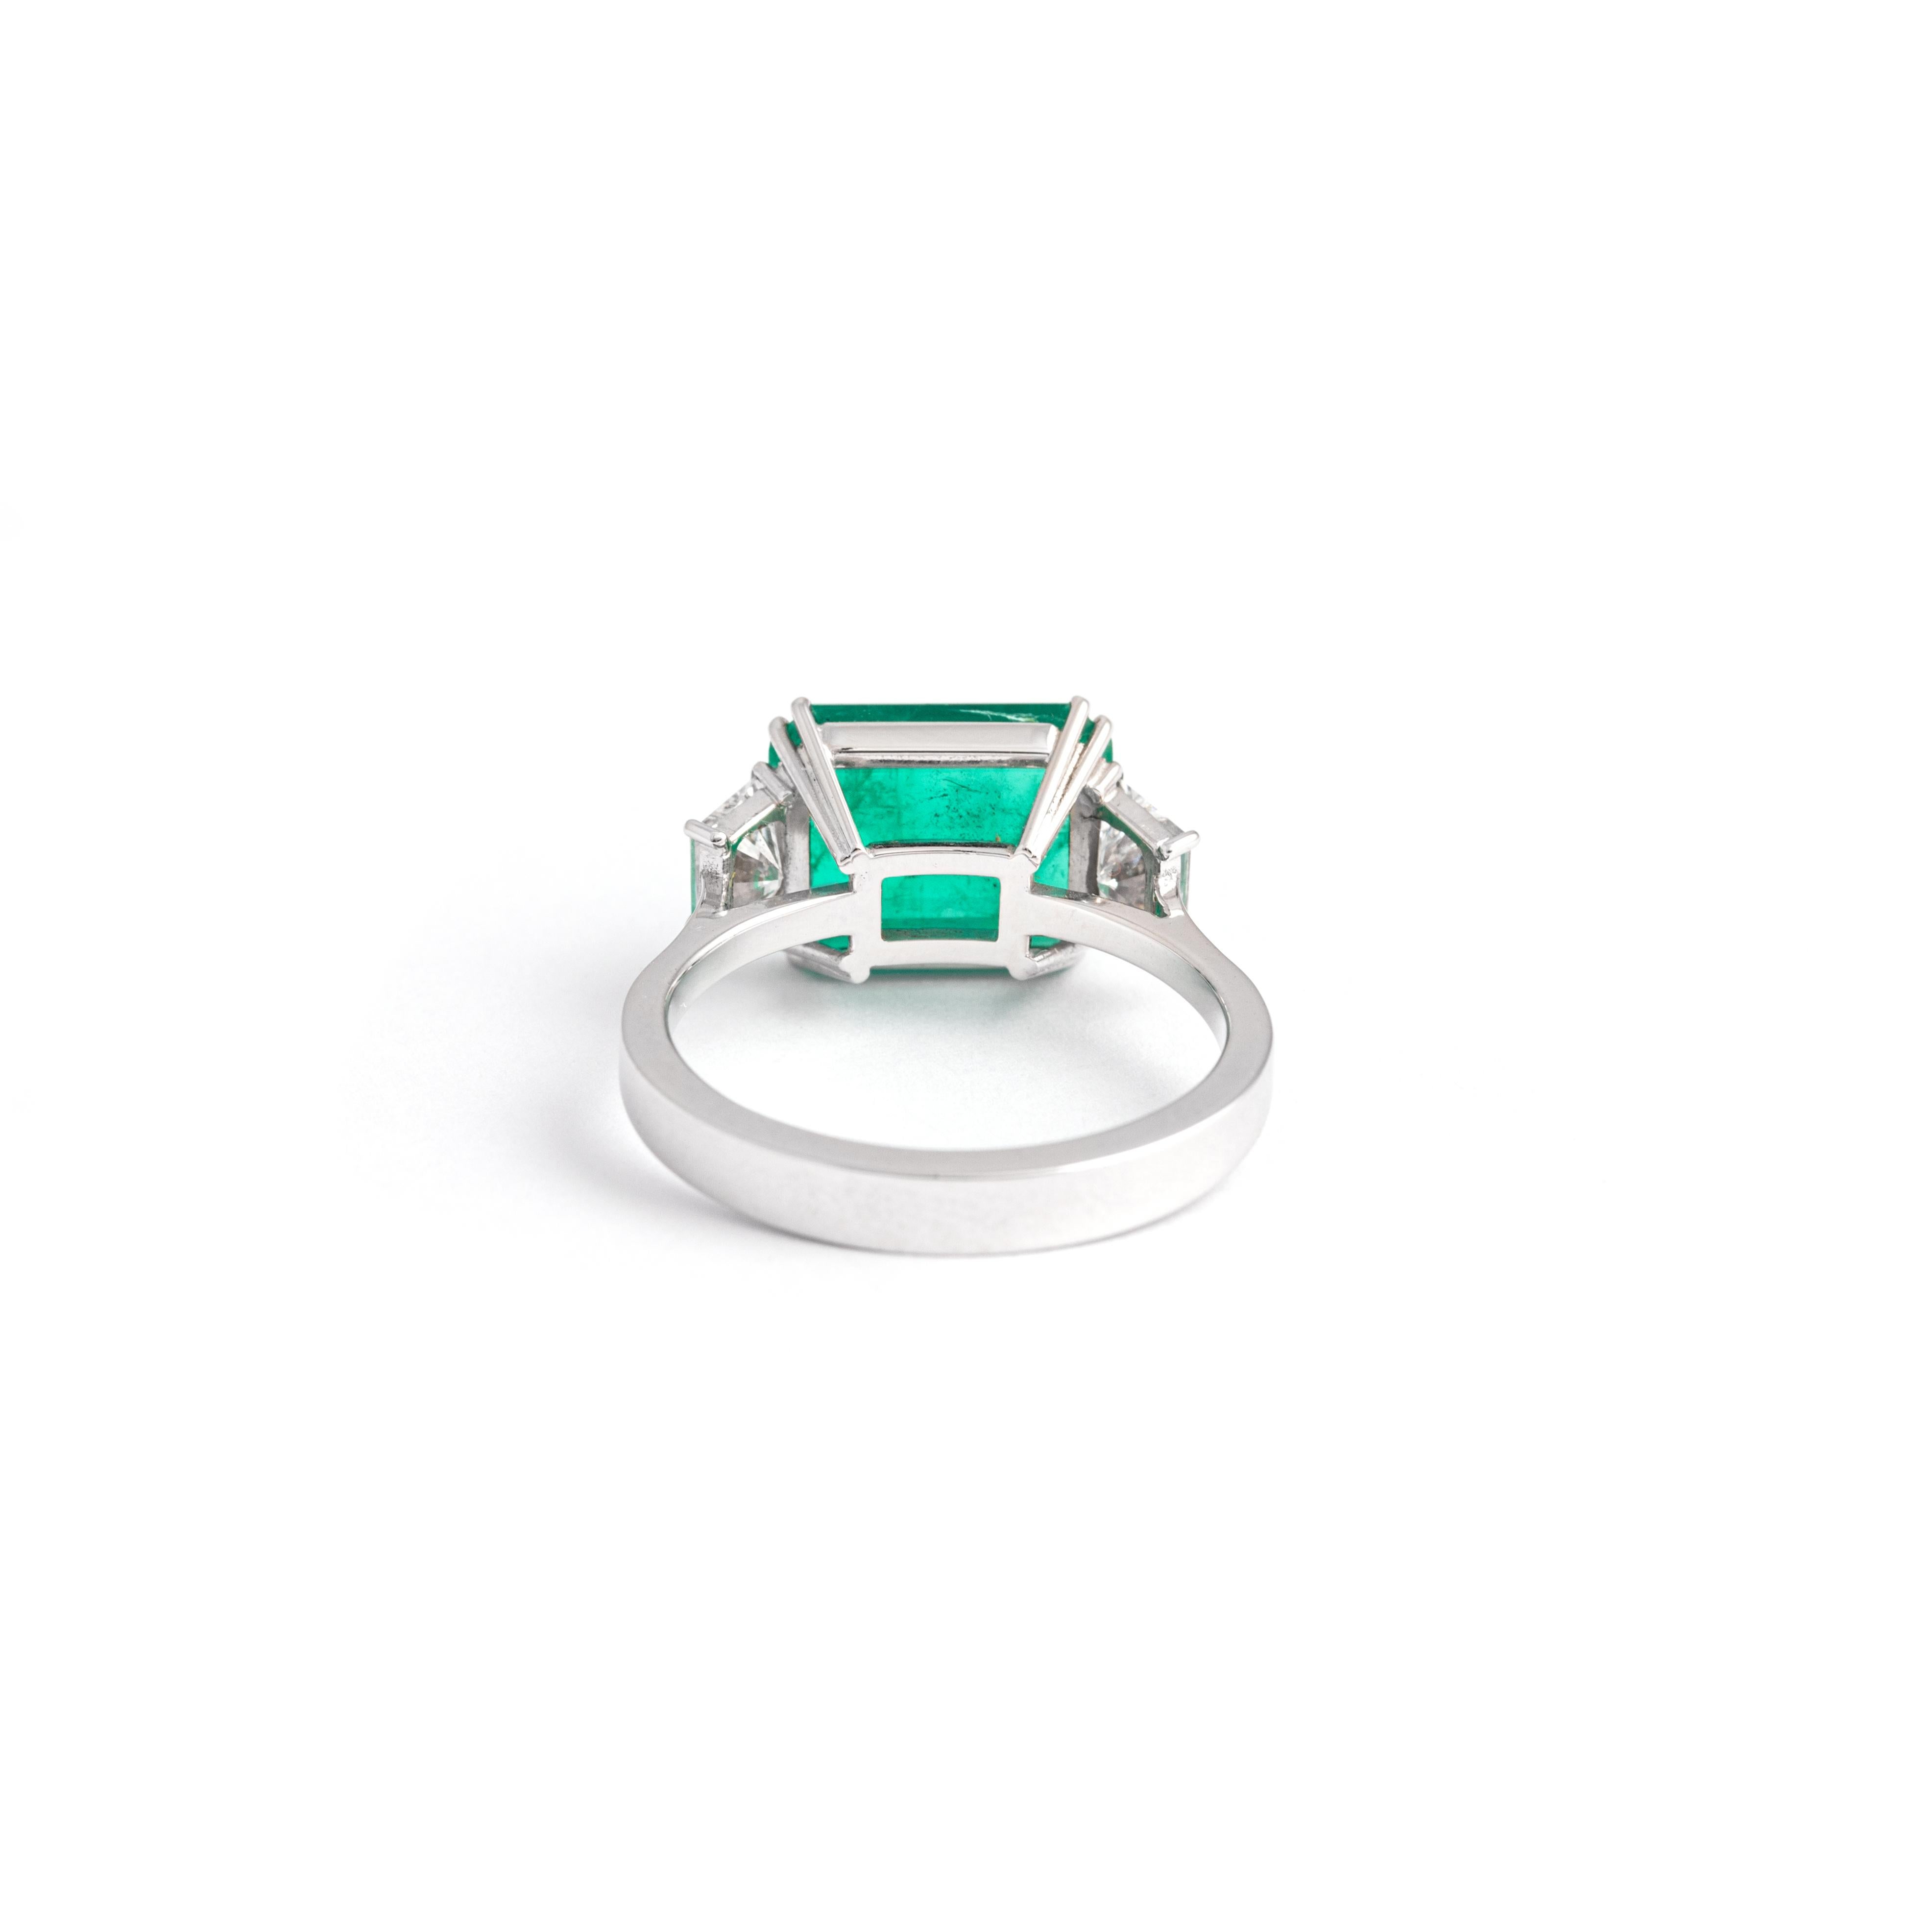 3.25 Carat Colombian Emerald Ring For Sale 2